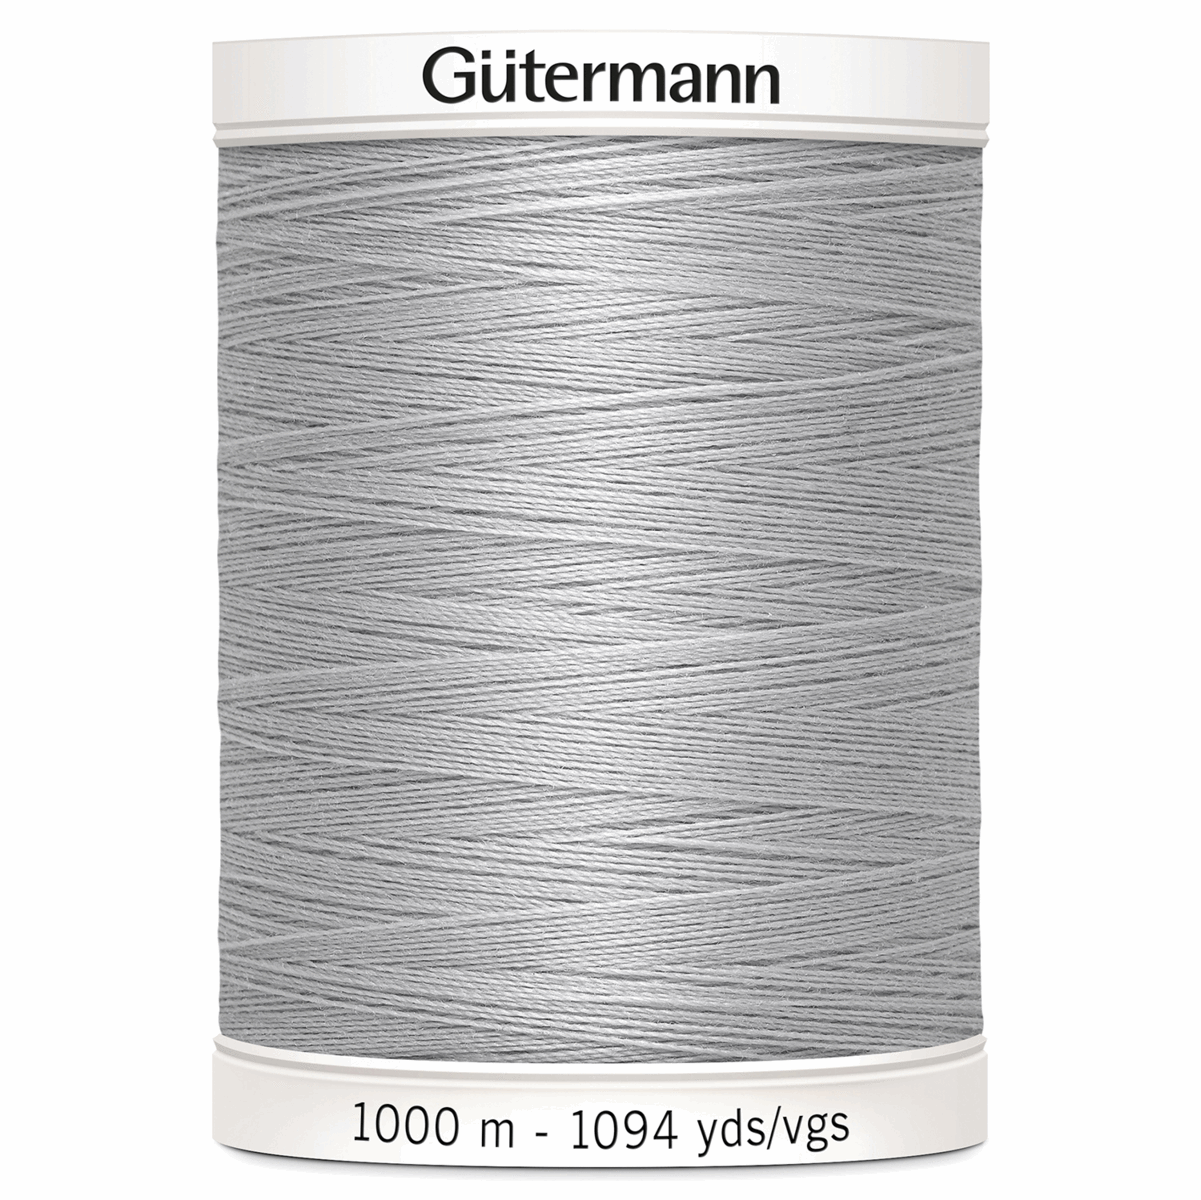 1000m size Gutermann Sew-All Sewing Thread 38 Grey from Jaycotts Sewing Supplies